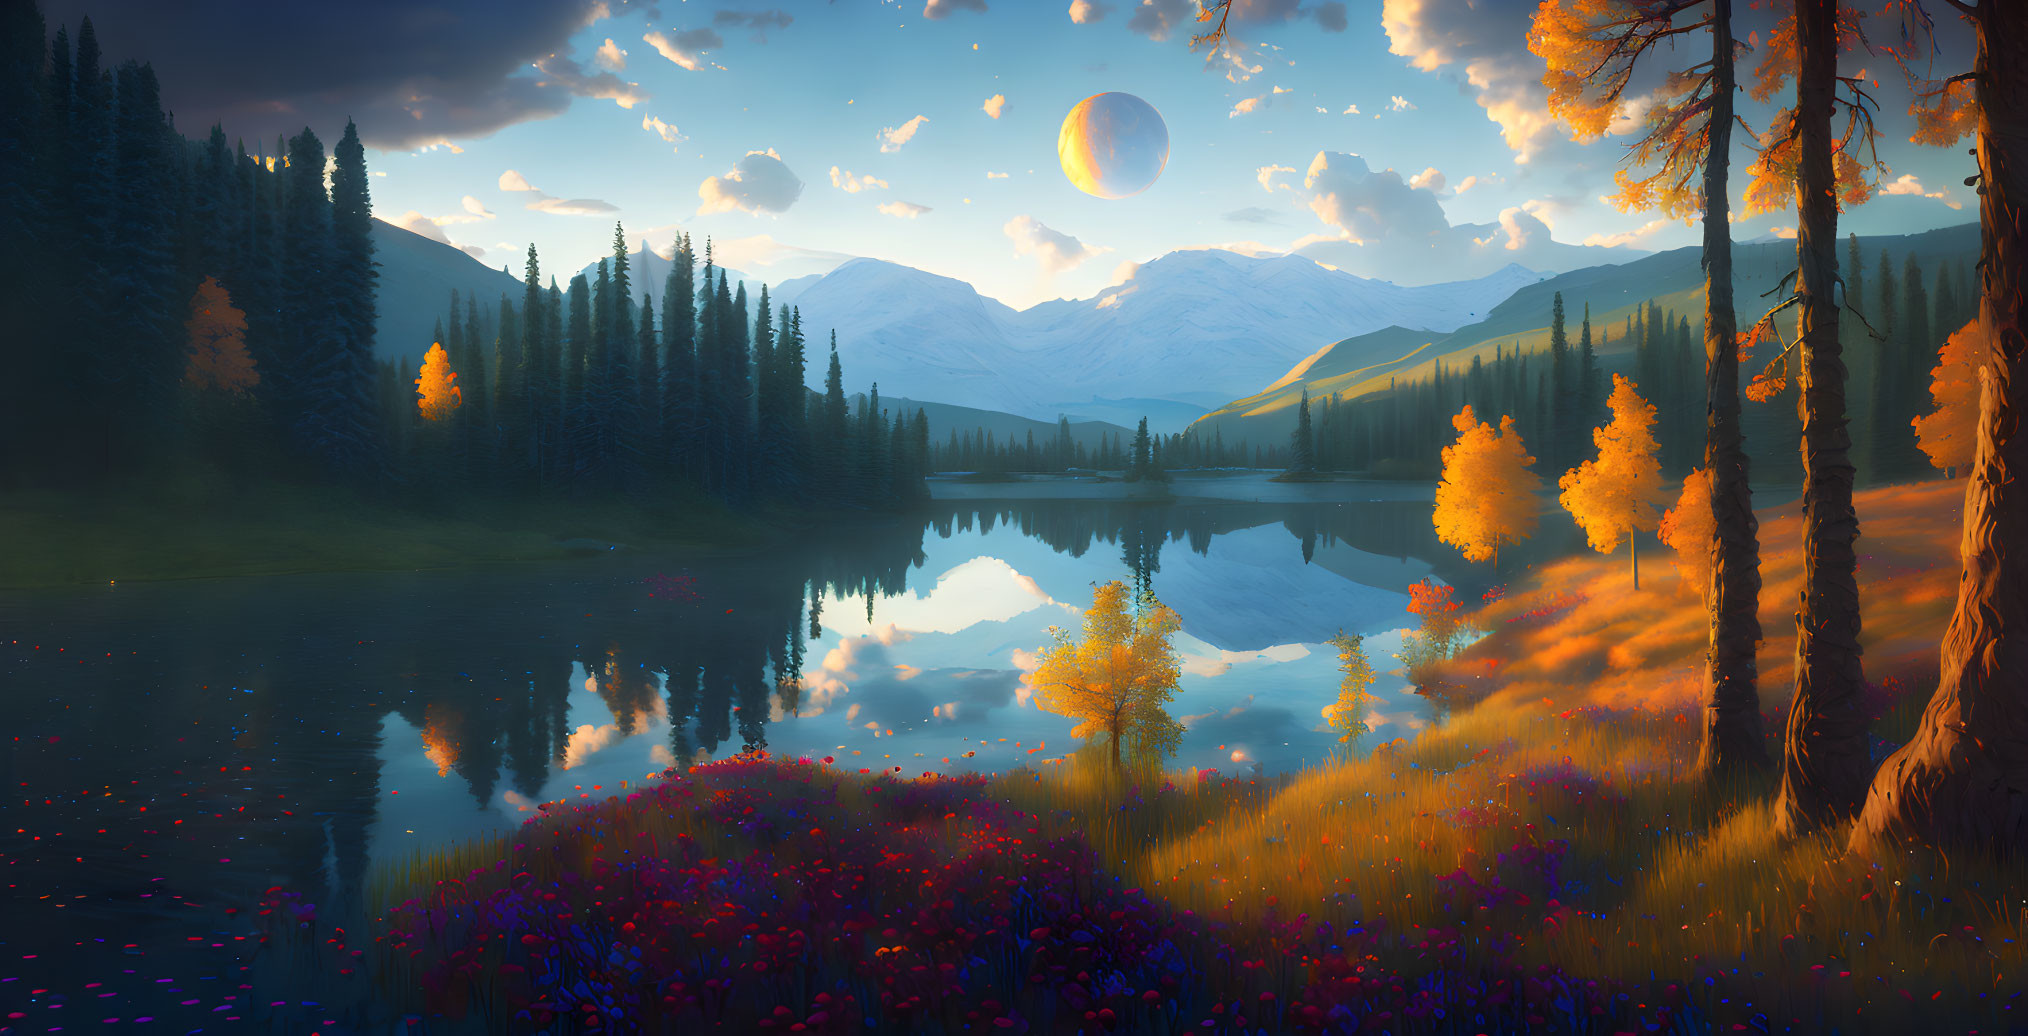 Vivid autumn landscape with lake, mountain, and moon.